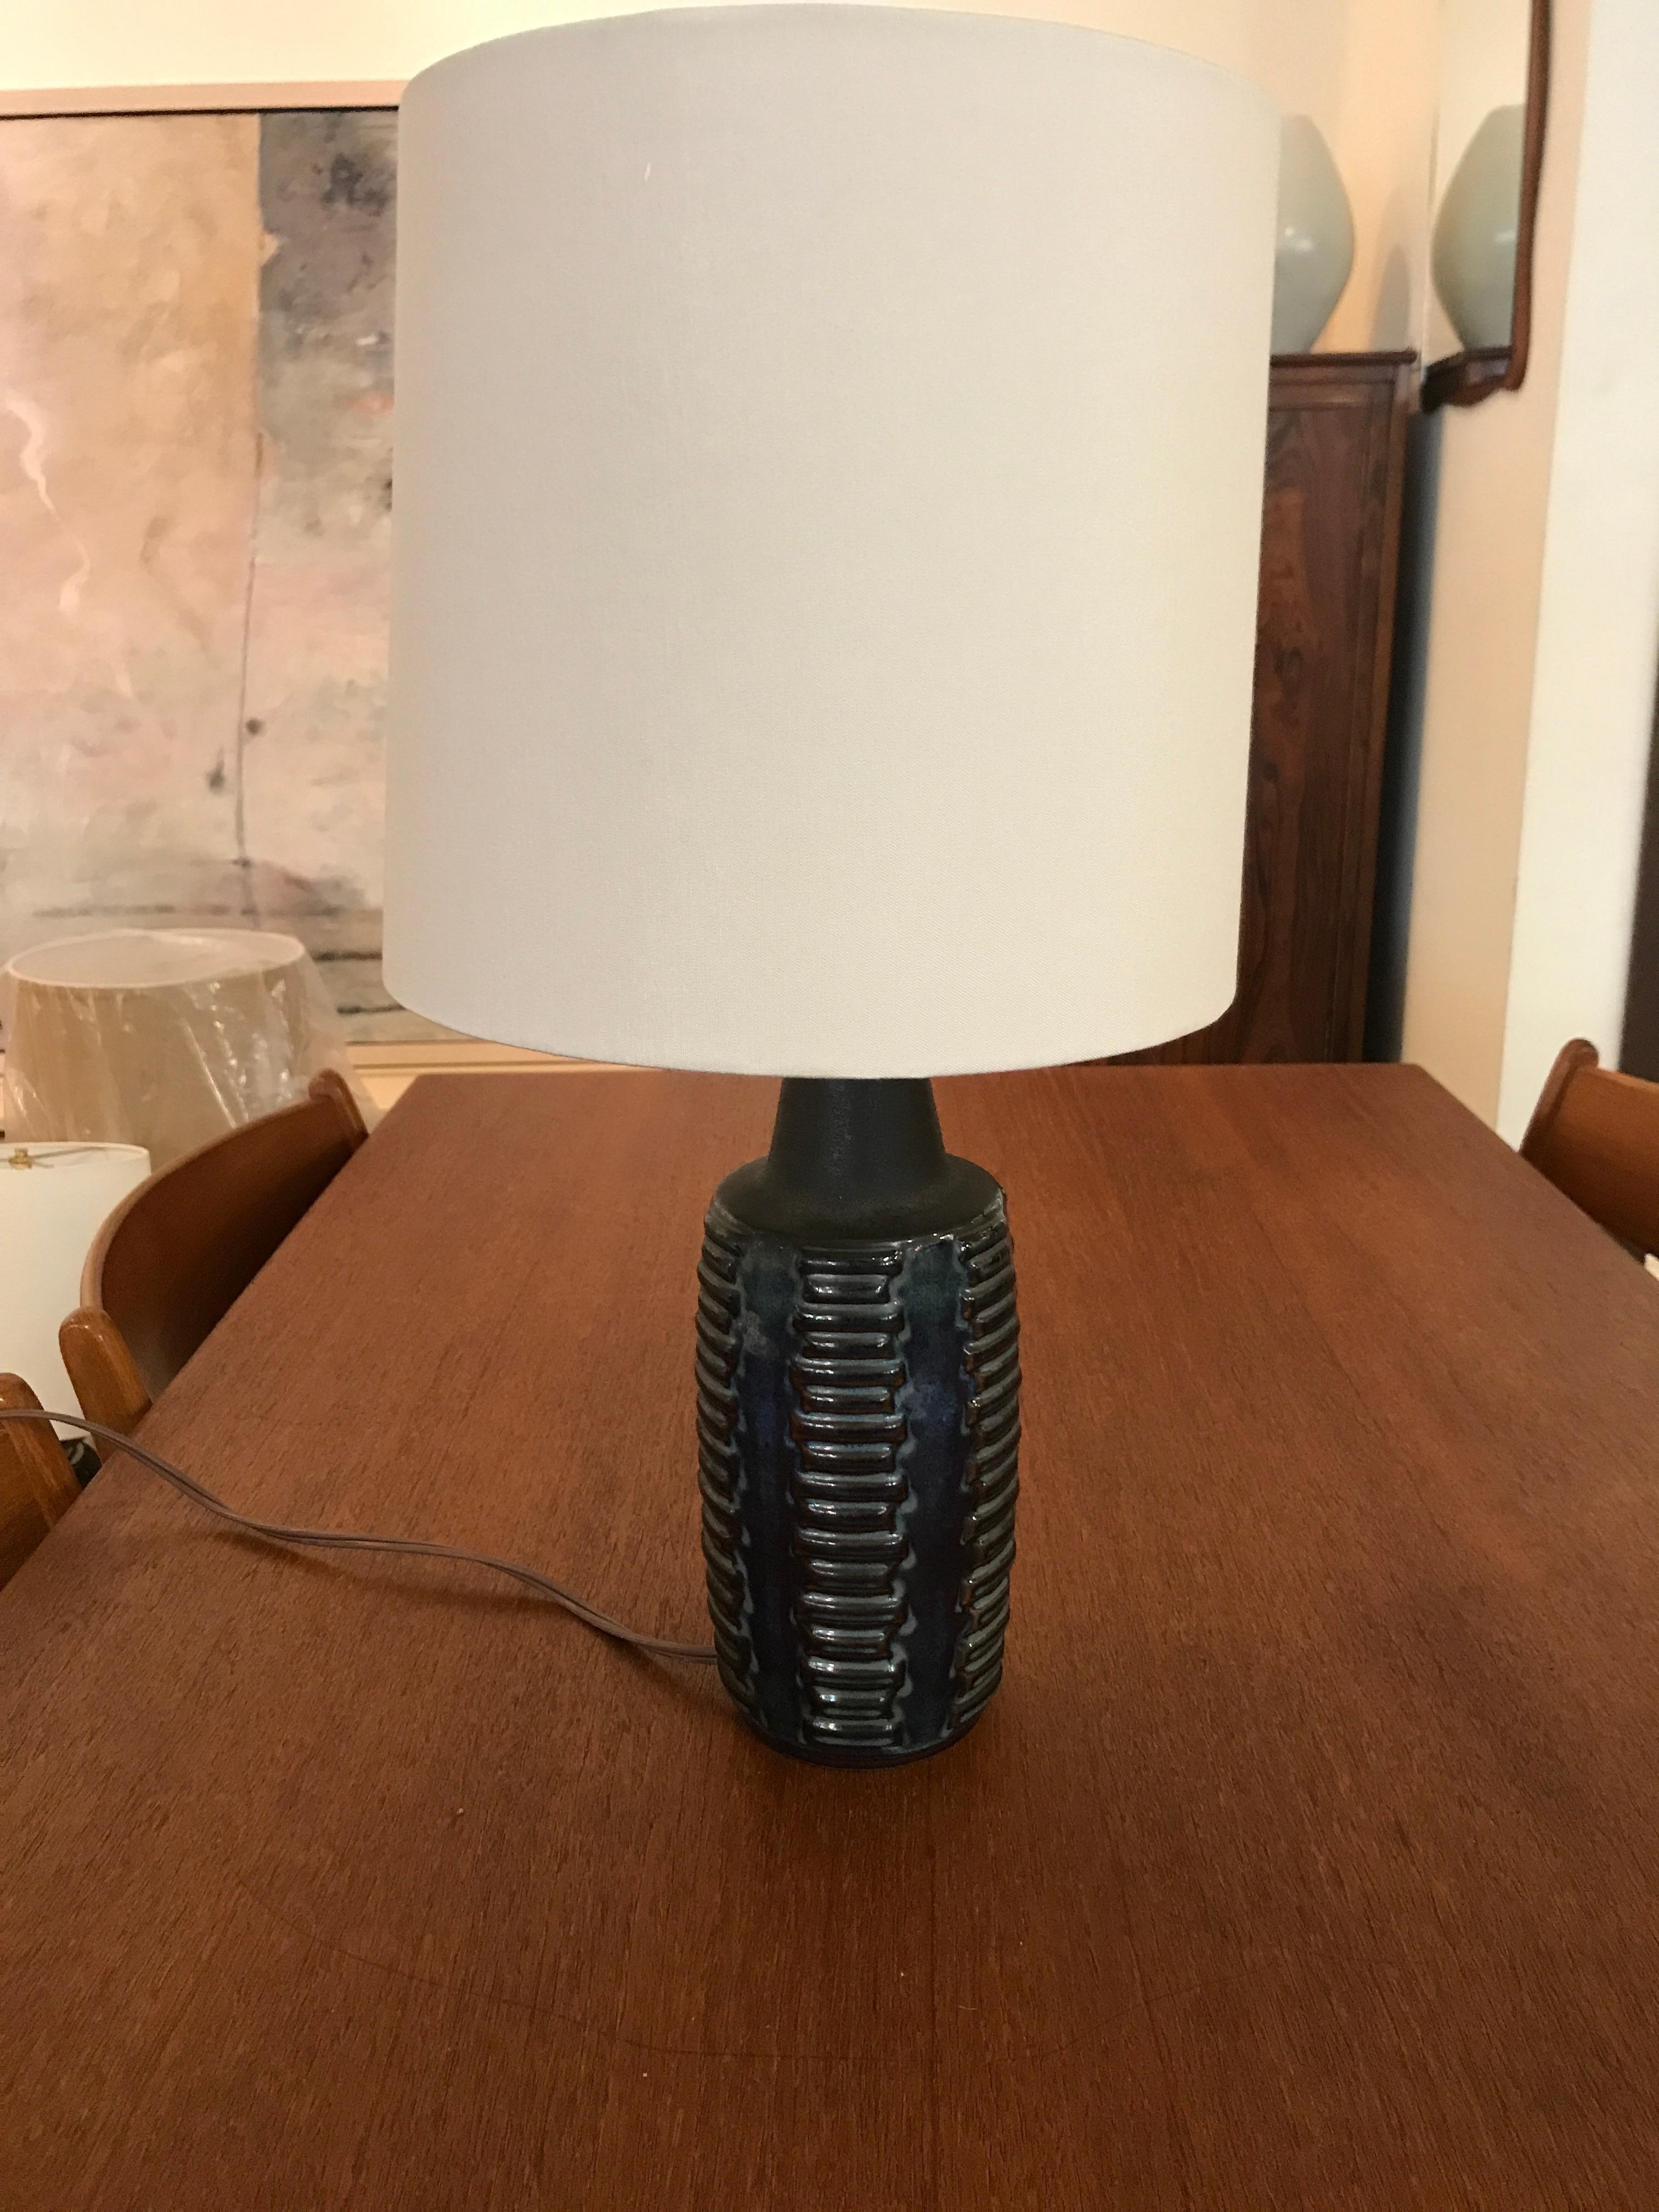 This large Soholm/Stento table lamp features a sarcomere shaped columnar pattern.